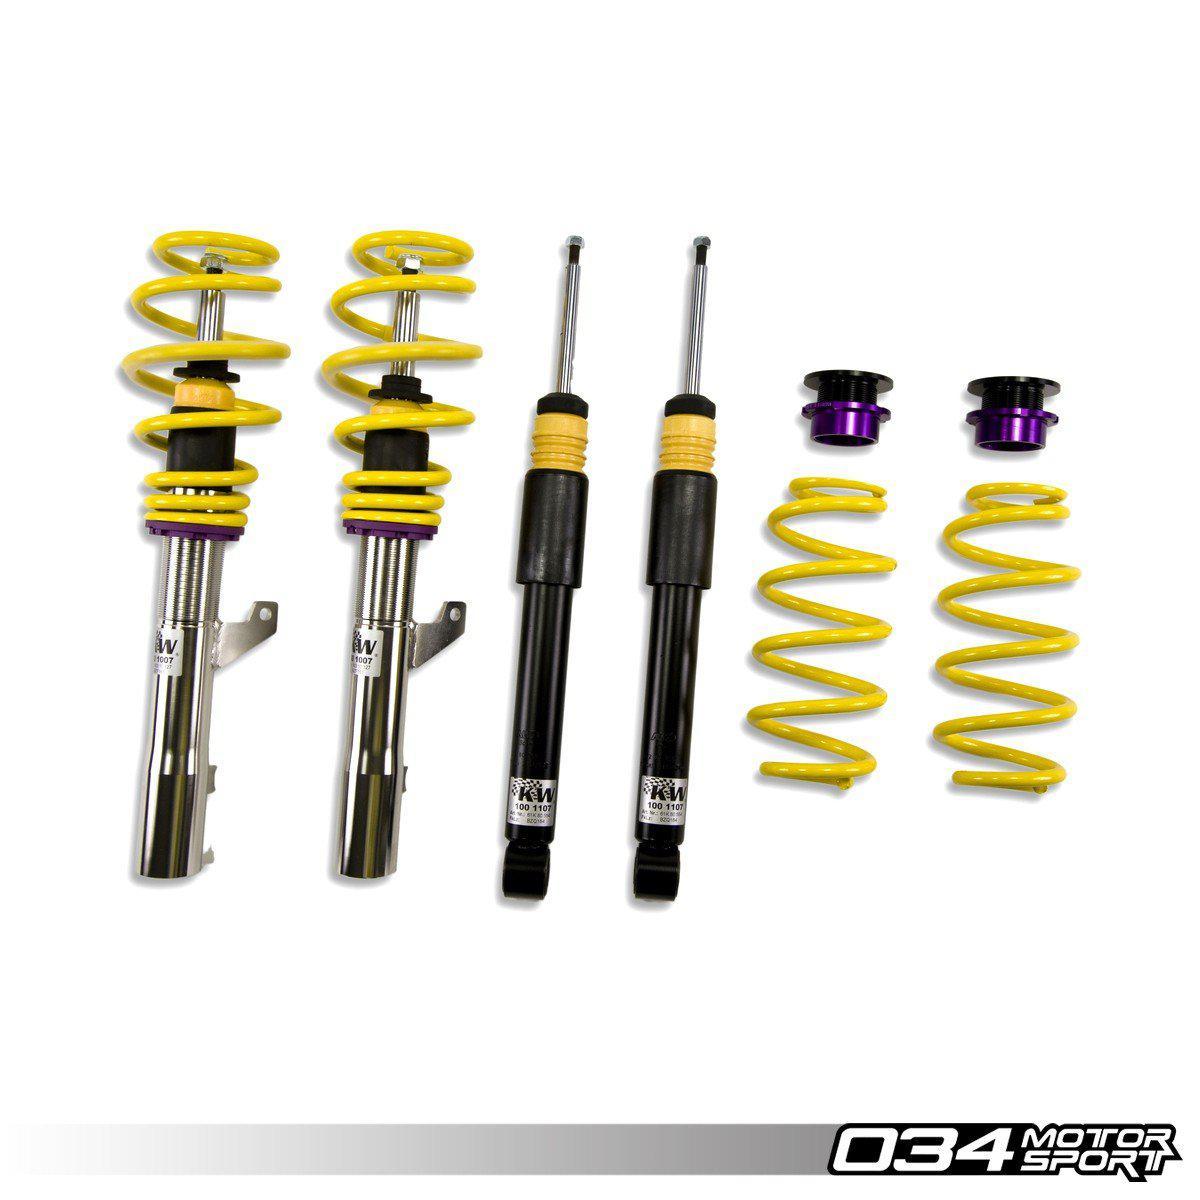 KW Variant 1 Coilover Suspension, 8p Audi A3 Quattro & B6/B7 Volkswagen Passat With Edc-A Little Tuning Co